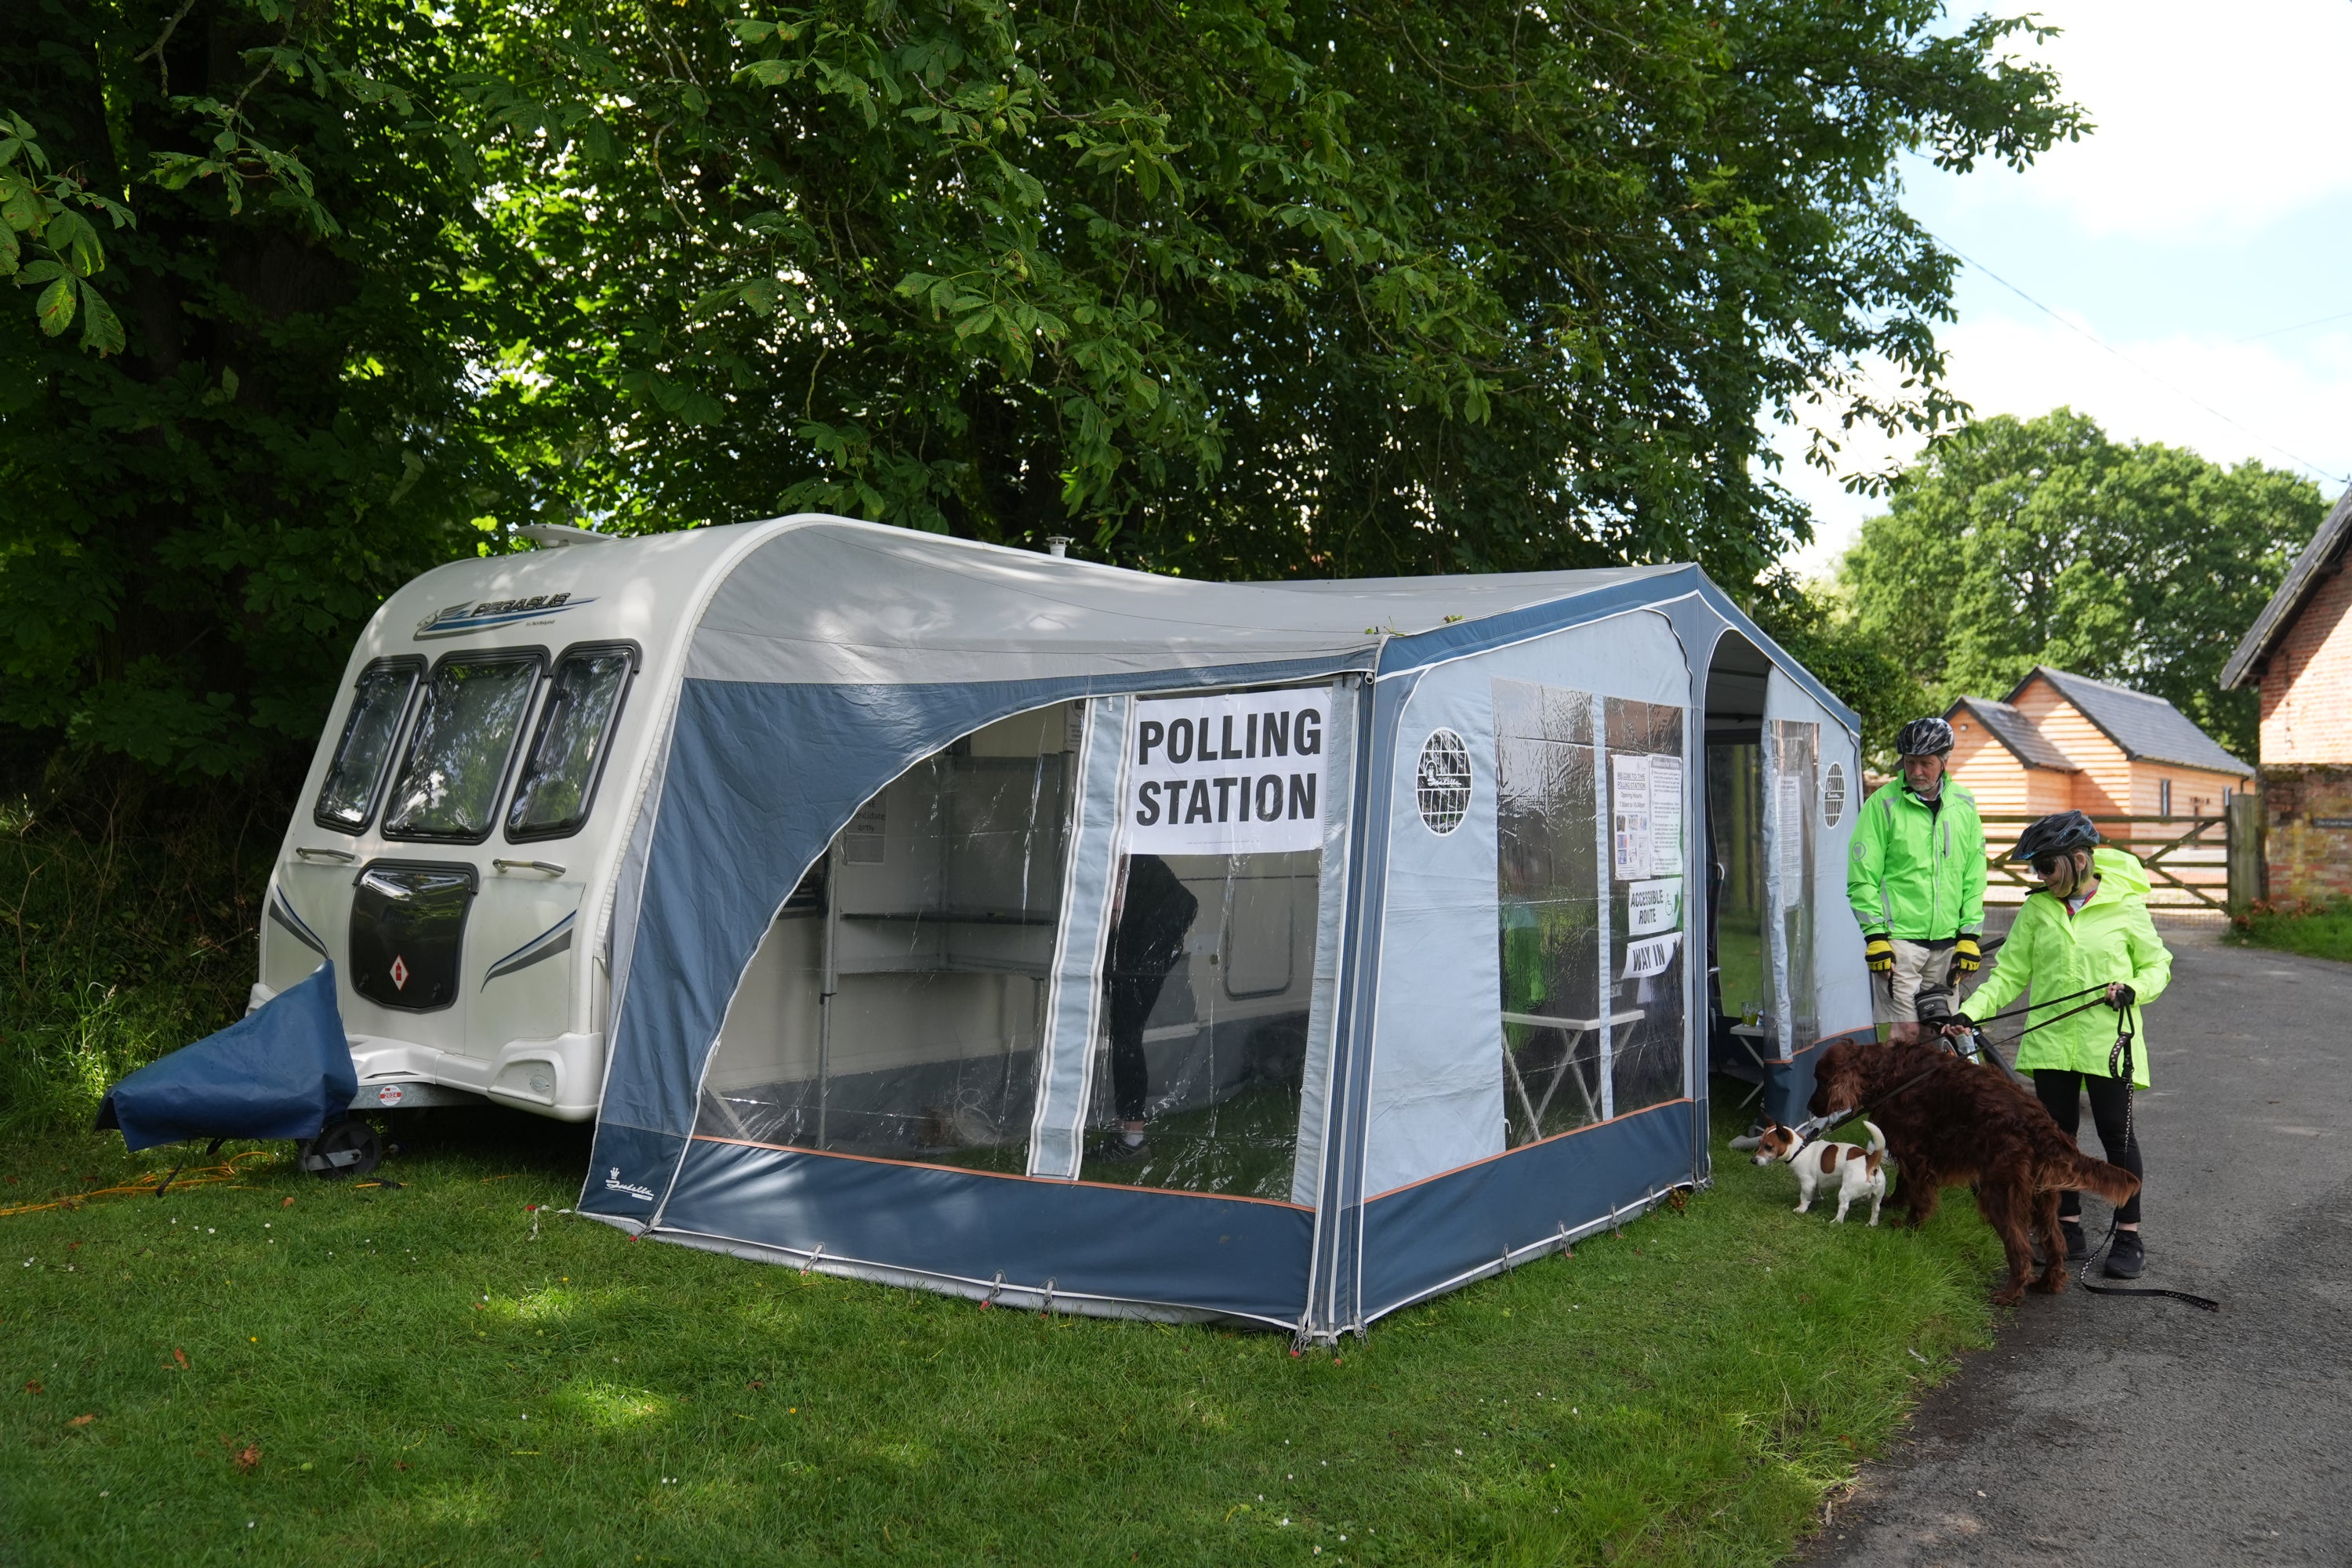 Voters arrive to cast their votes in a caravan used as a polling station in Carlton, Cambridgeshire, in the 2024 General Election